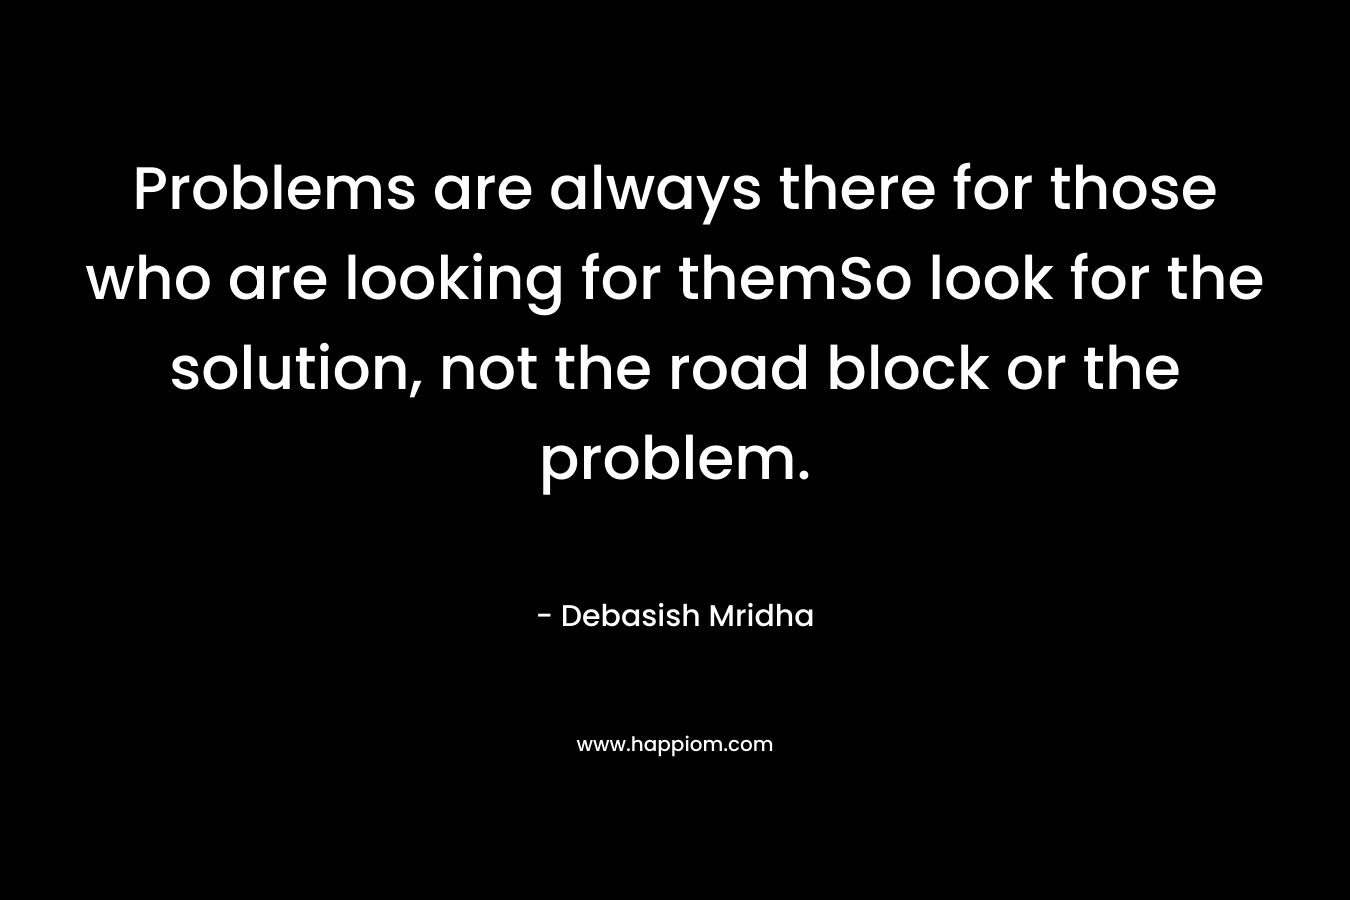 Problems are always there for those who are looking for themSo look for the solution, not the road block or the problem.